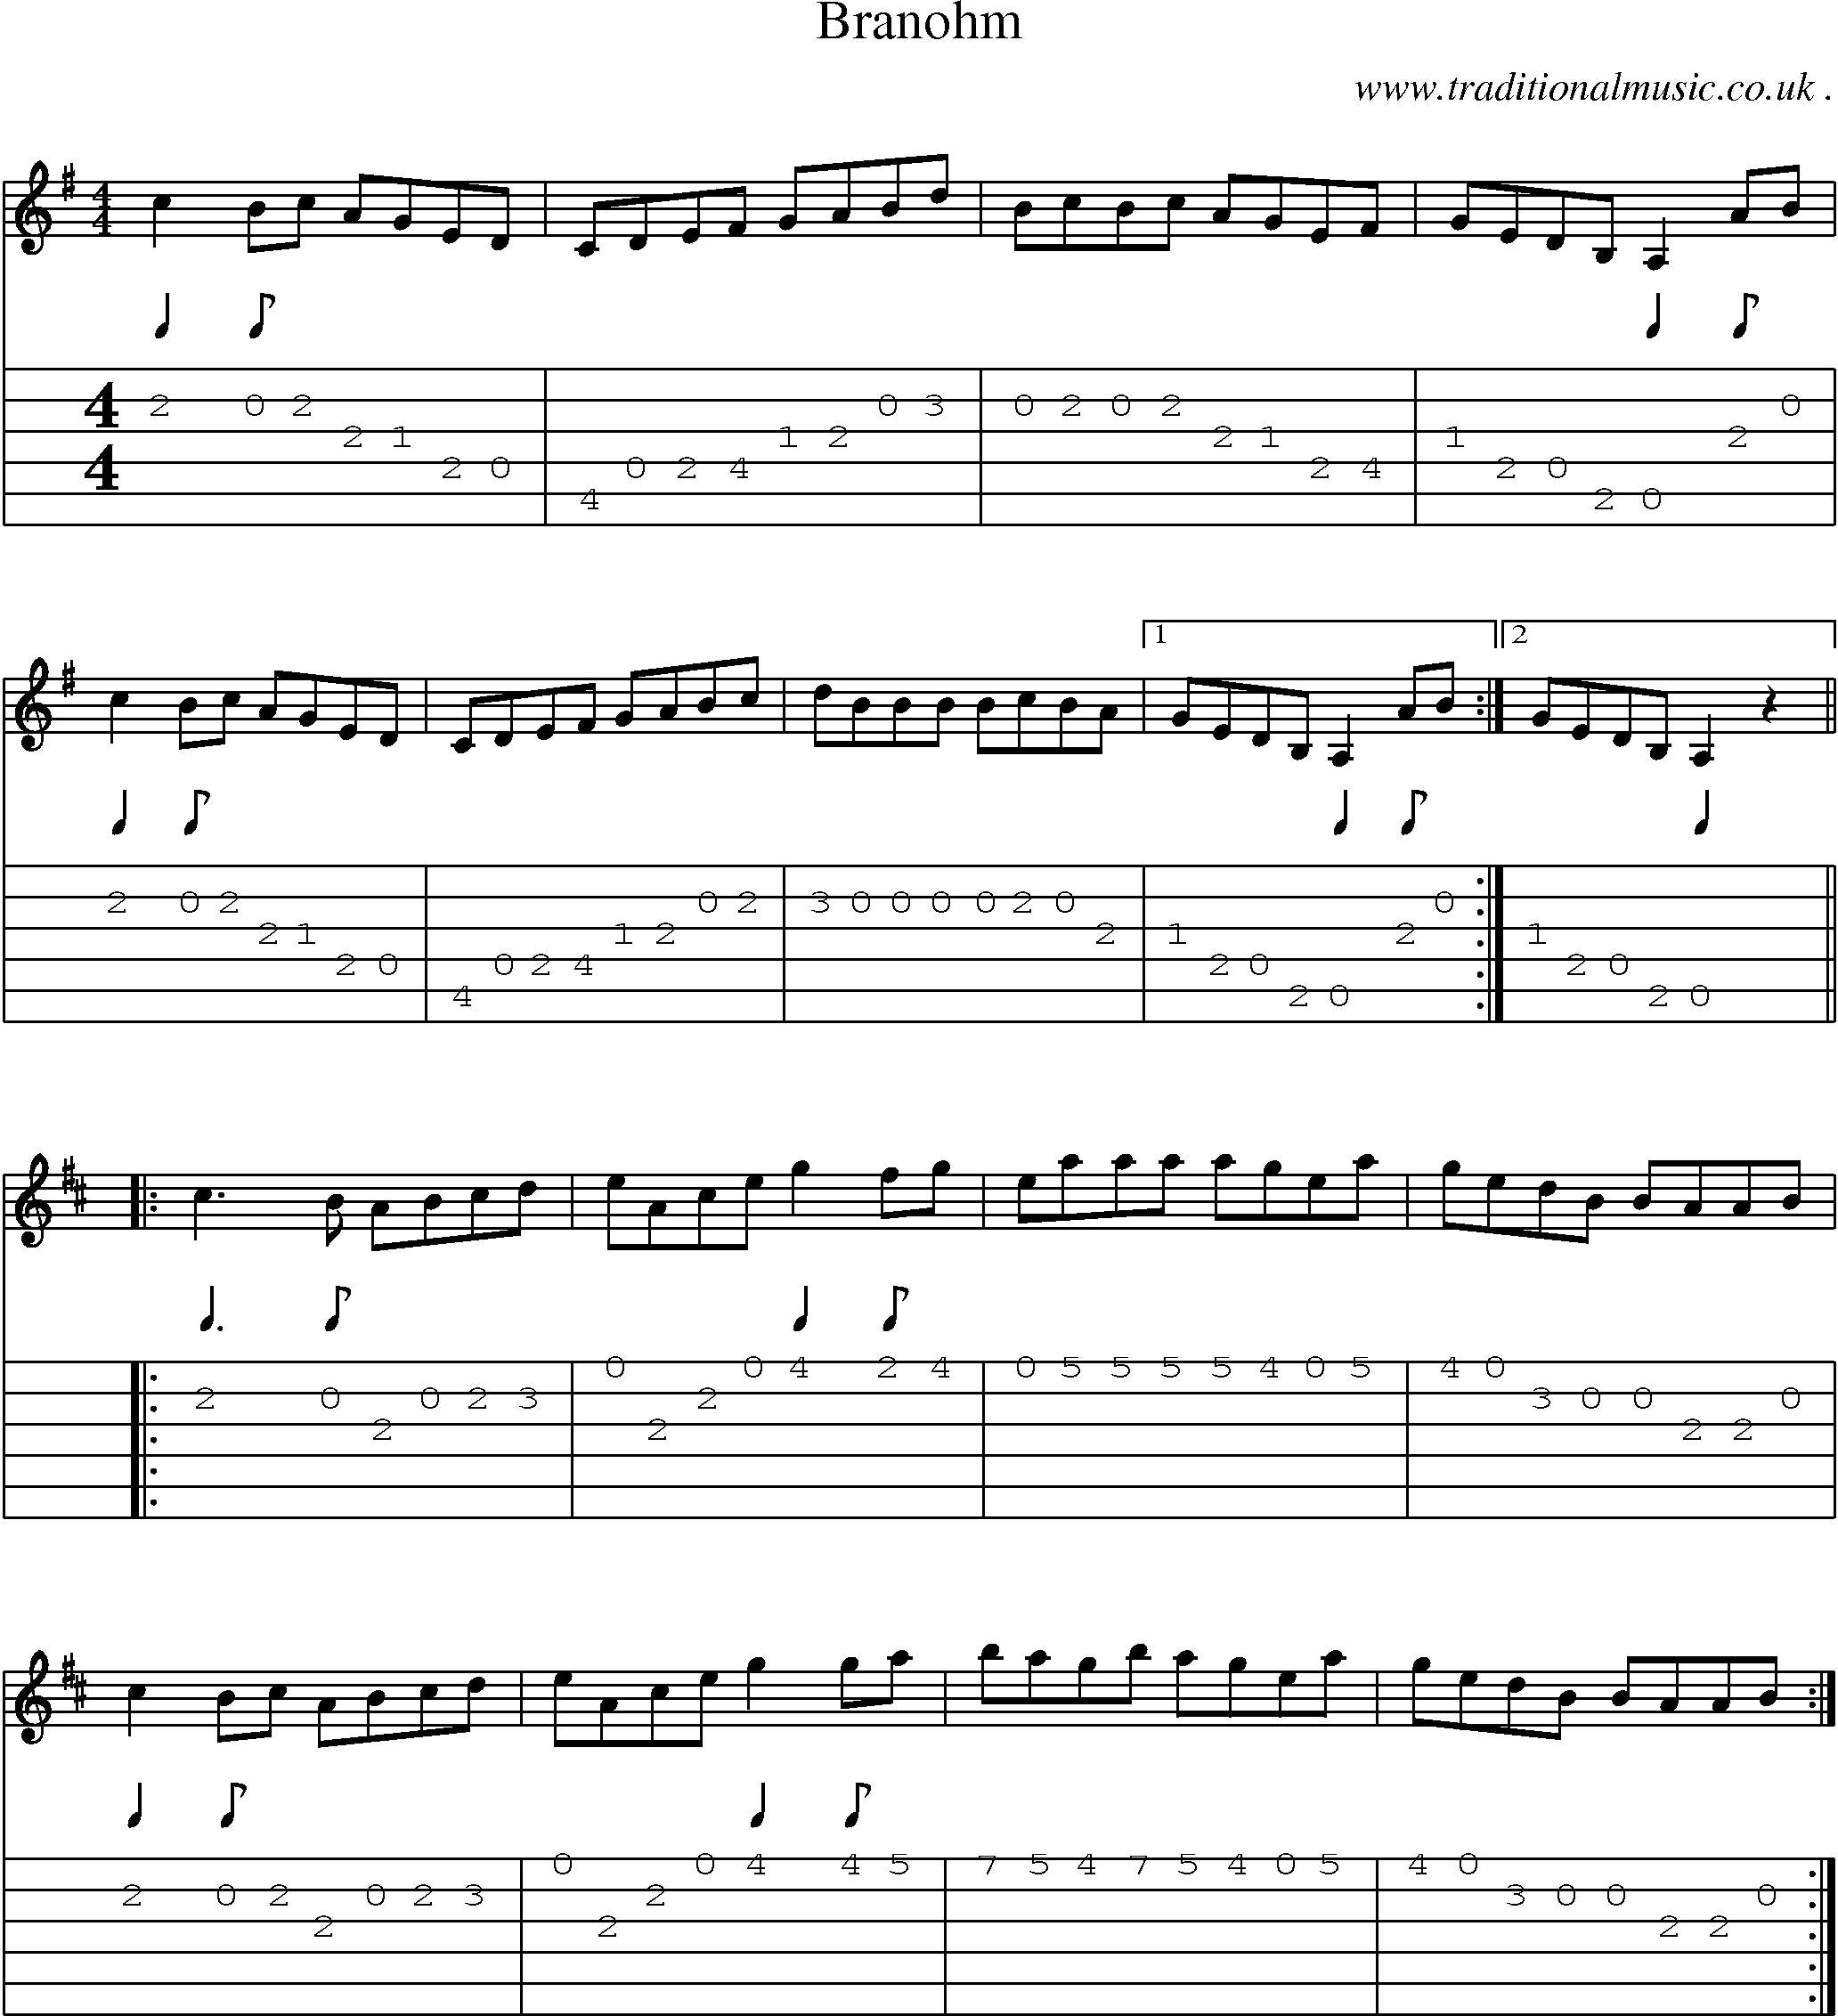 Sheet-Music and Guitar Tabs for Branohm